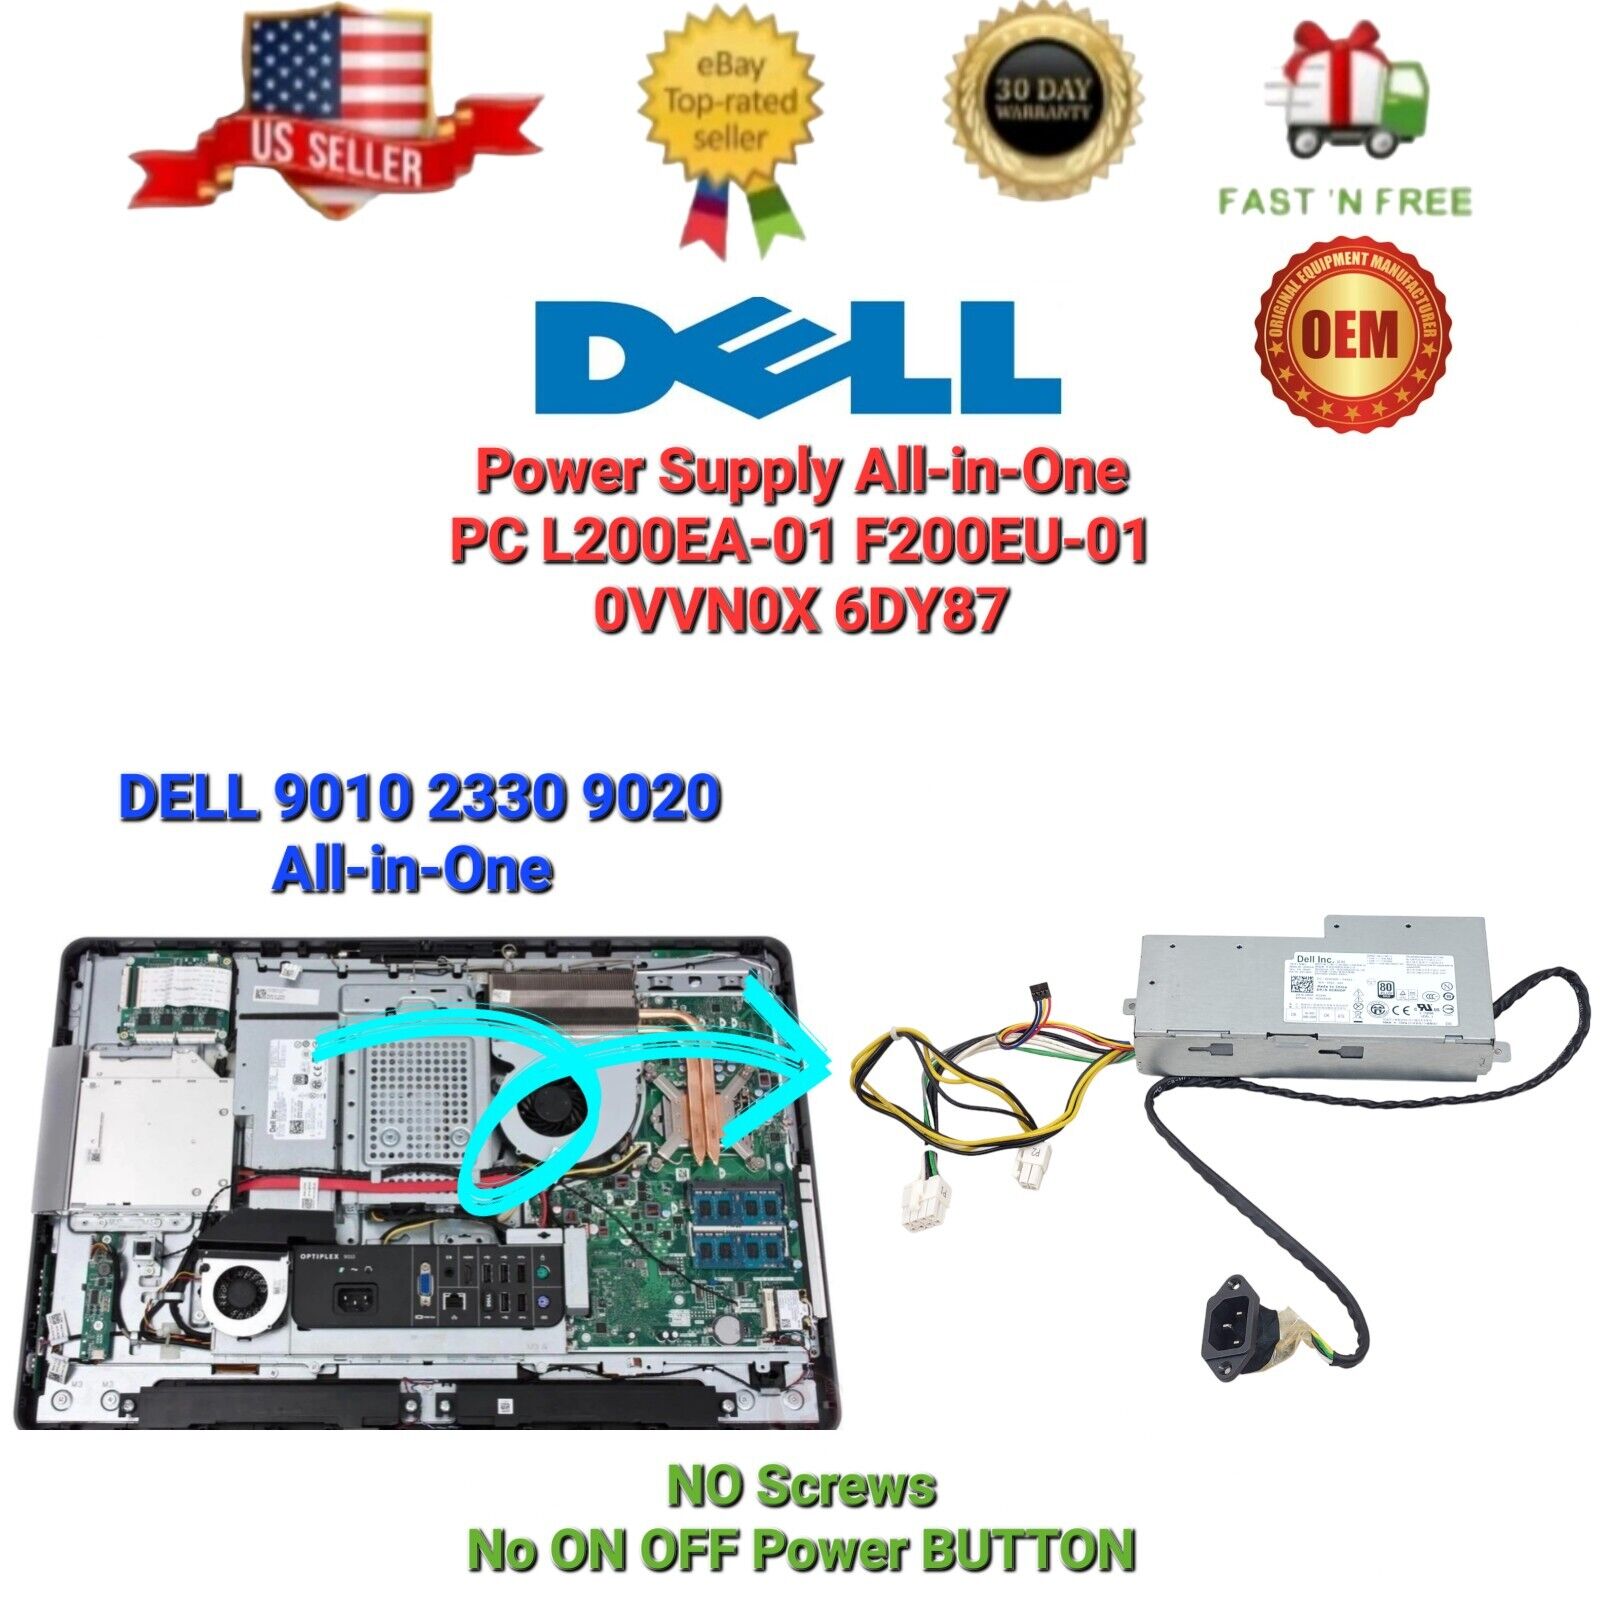 DELL 9010 2330 9020 Power Supply All-in-One PC L200EA-01 F200EU-01 0VVN0X 6DY87